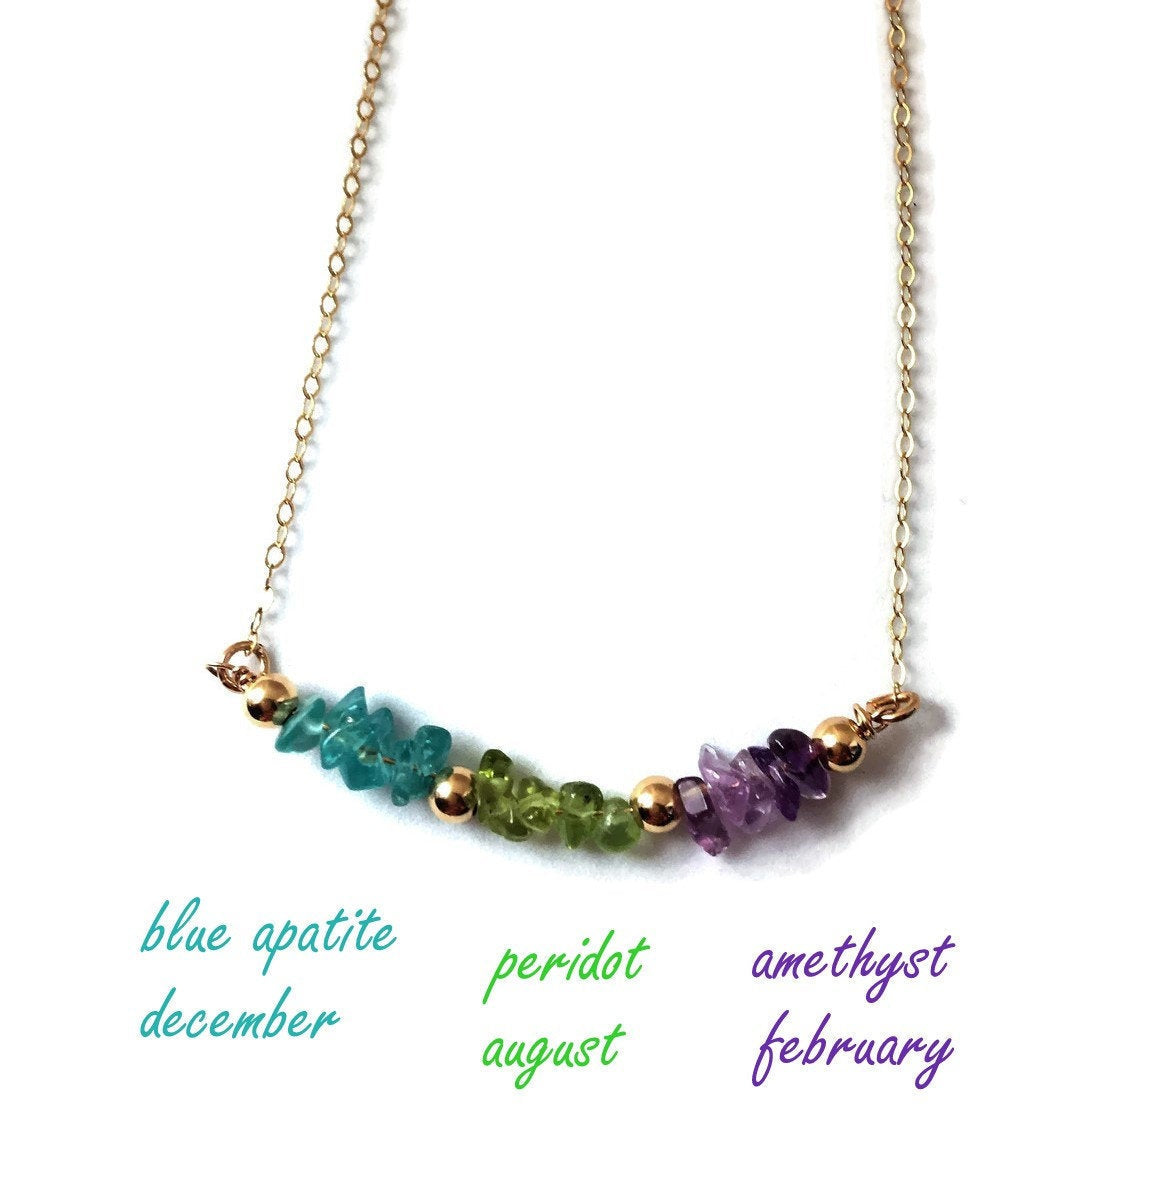 11 Energy Healing Necklaces to Make You Feel More Balanced | Us Weekly